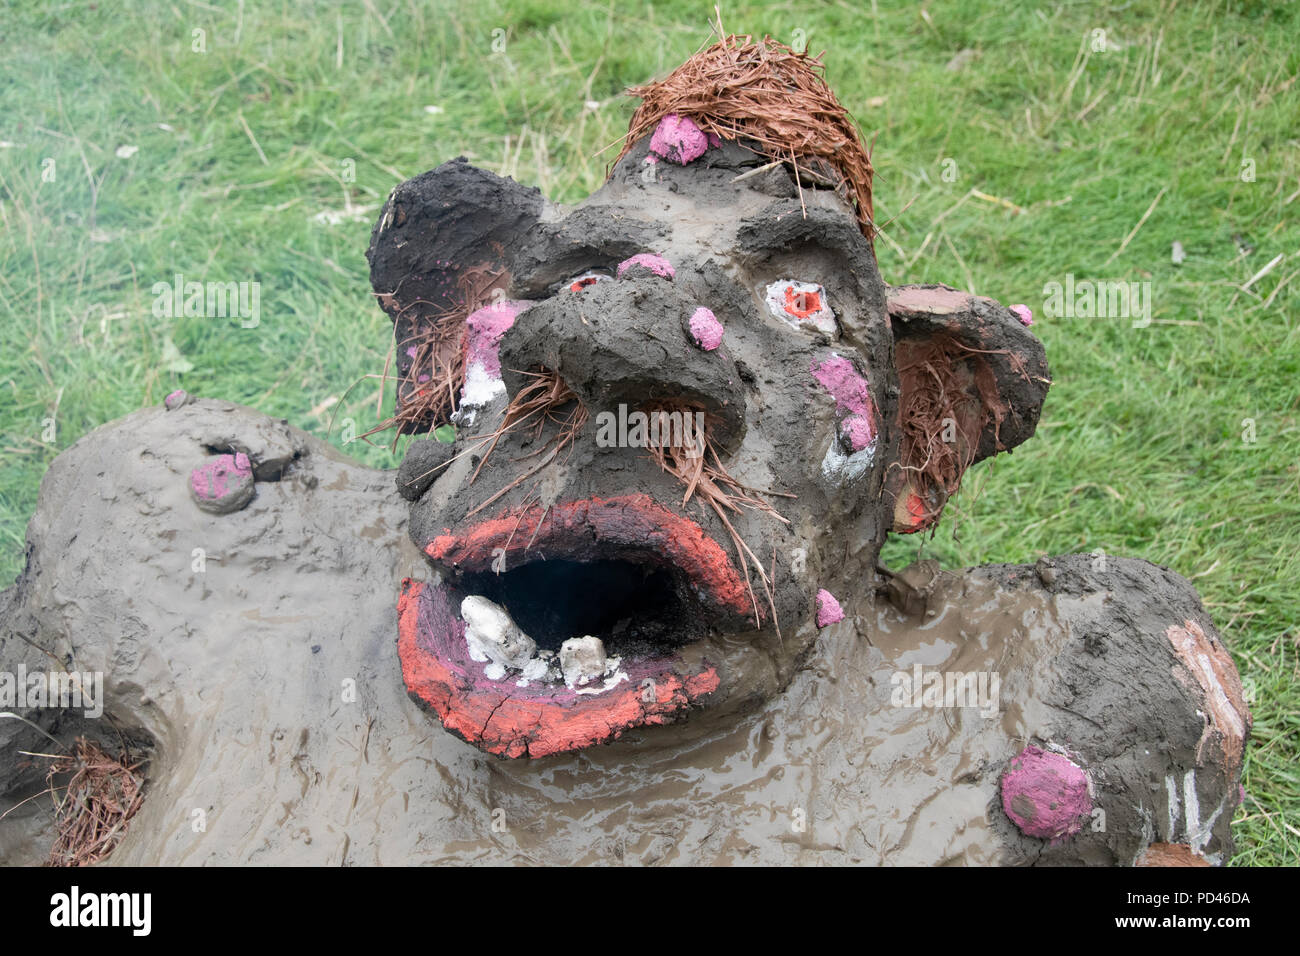 Chepstow, Wales – Aug 14: Make-up decorates the face of a newly made troll faced wood fired earth oven on 14 Aug 2015 at The Green Gathering Stock Photo